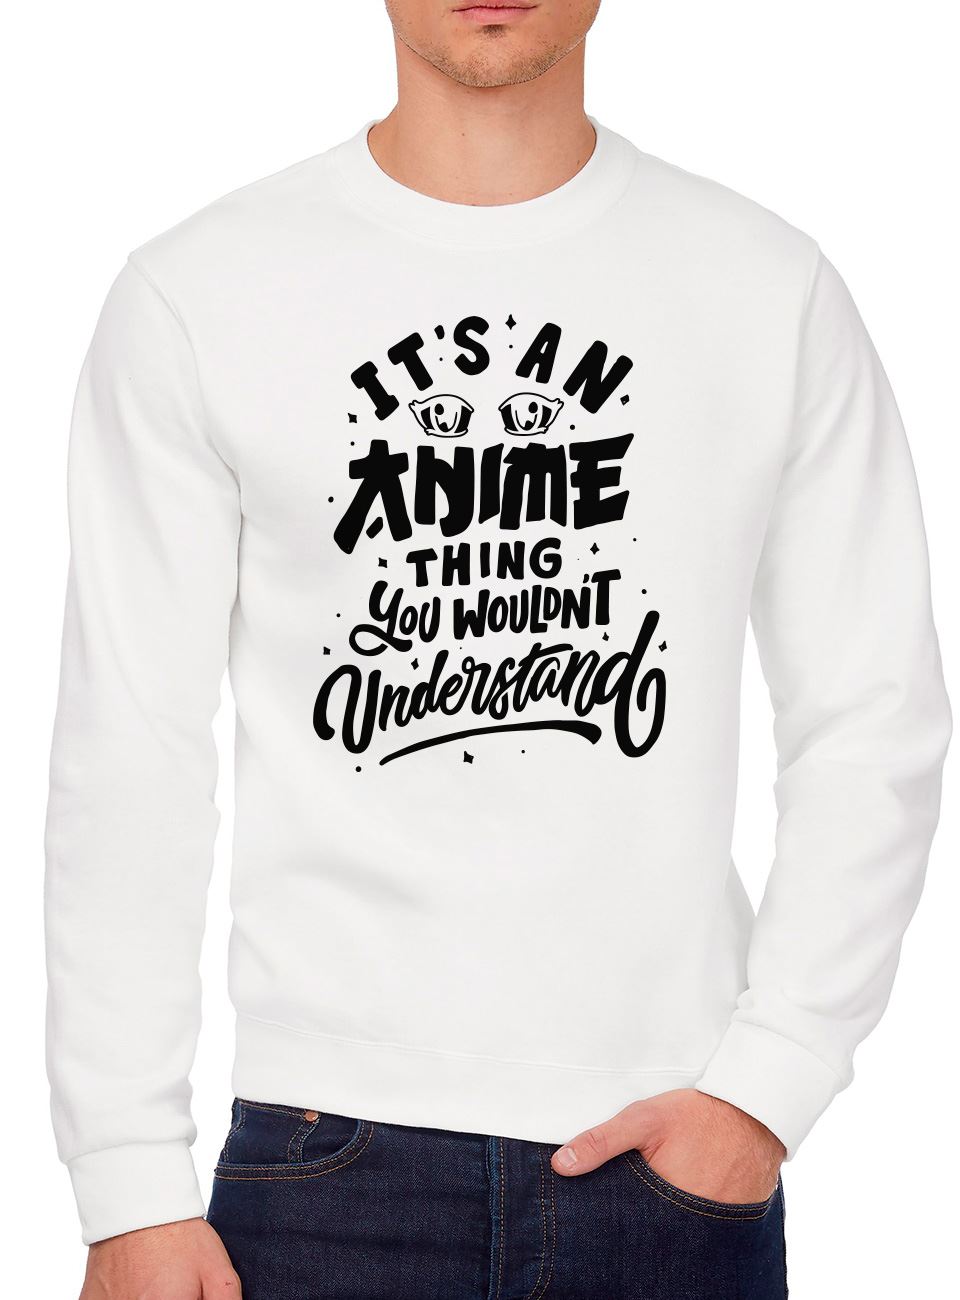 It's an Anime Thing You Wouldn't Understand - Youth & Mens Sweatshirt